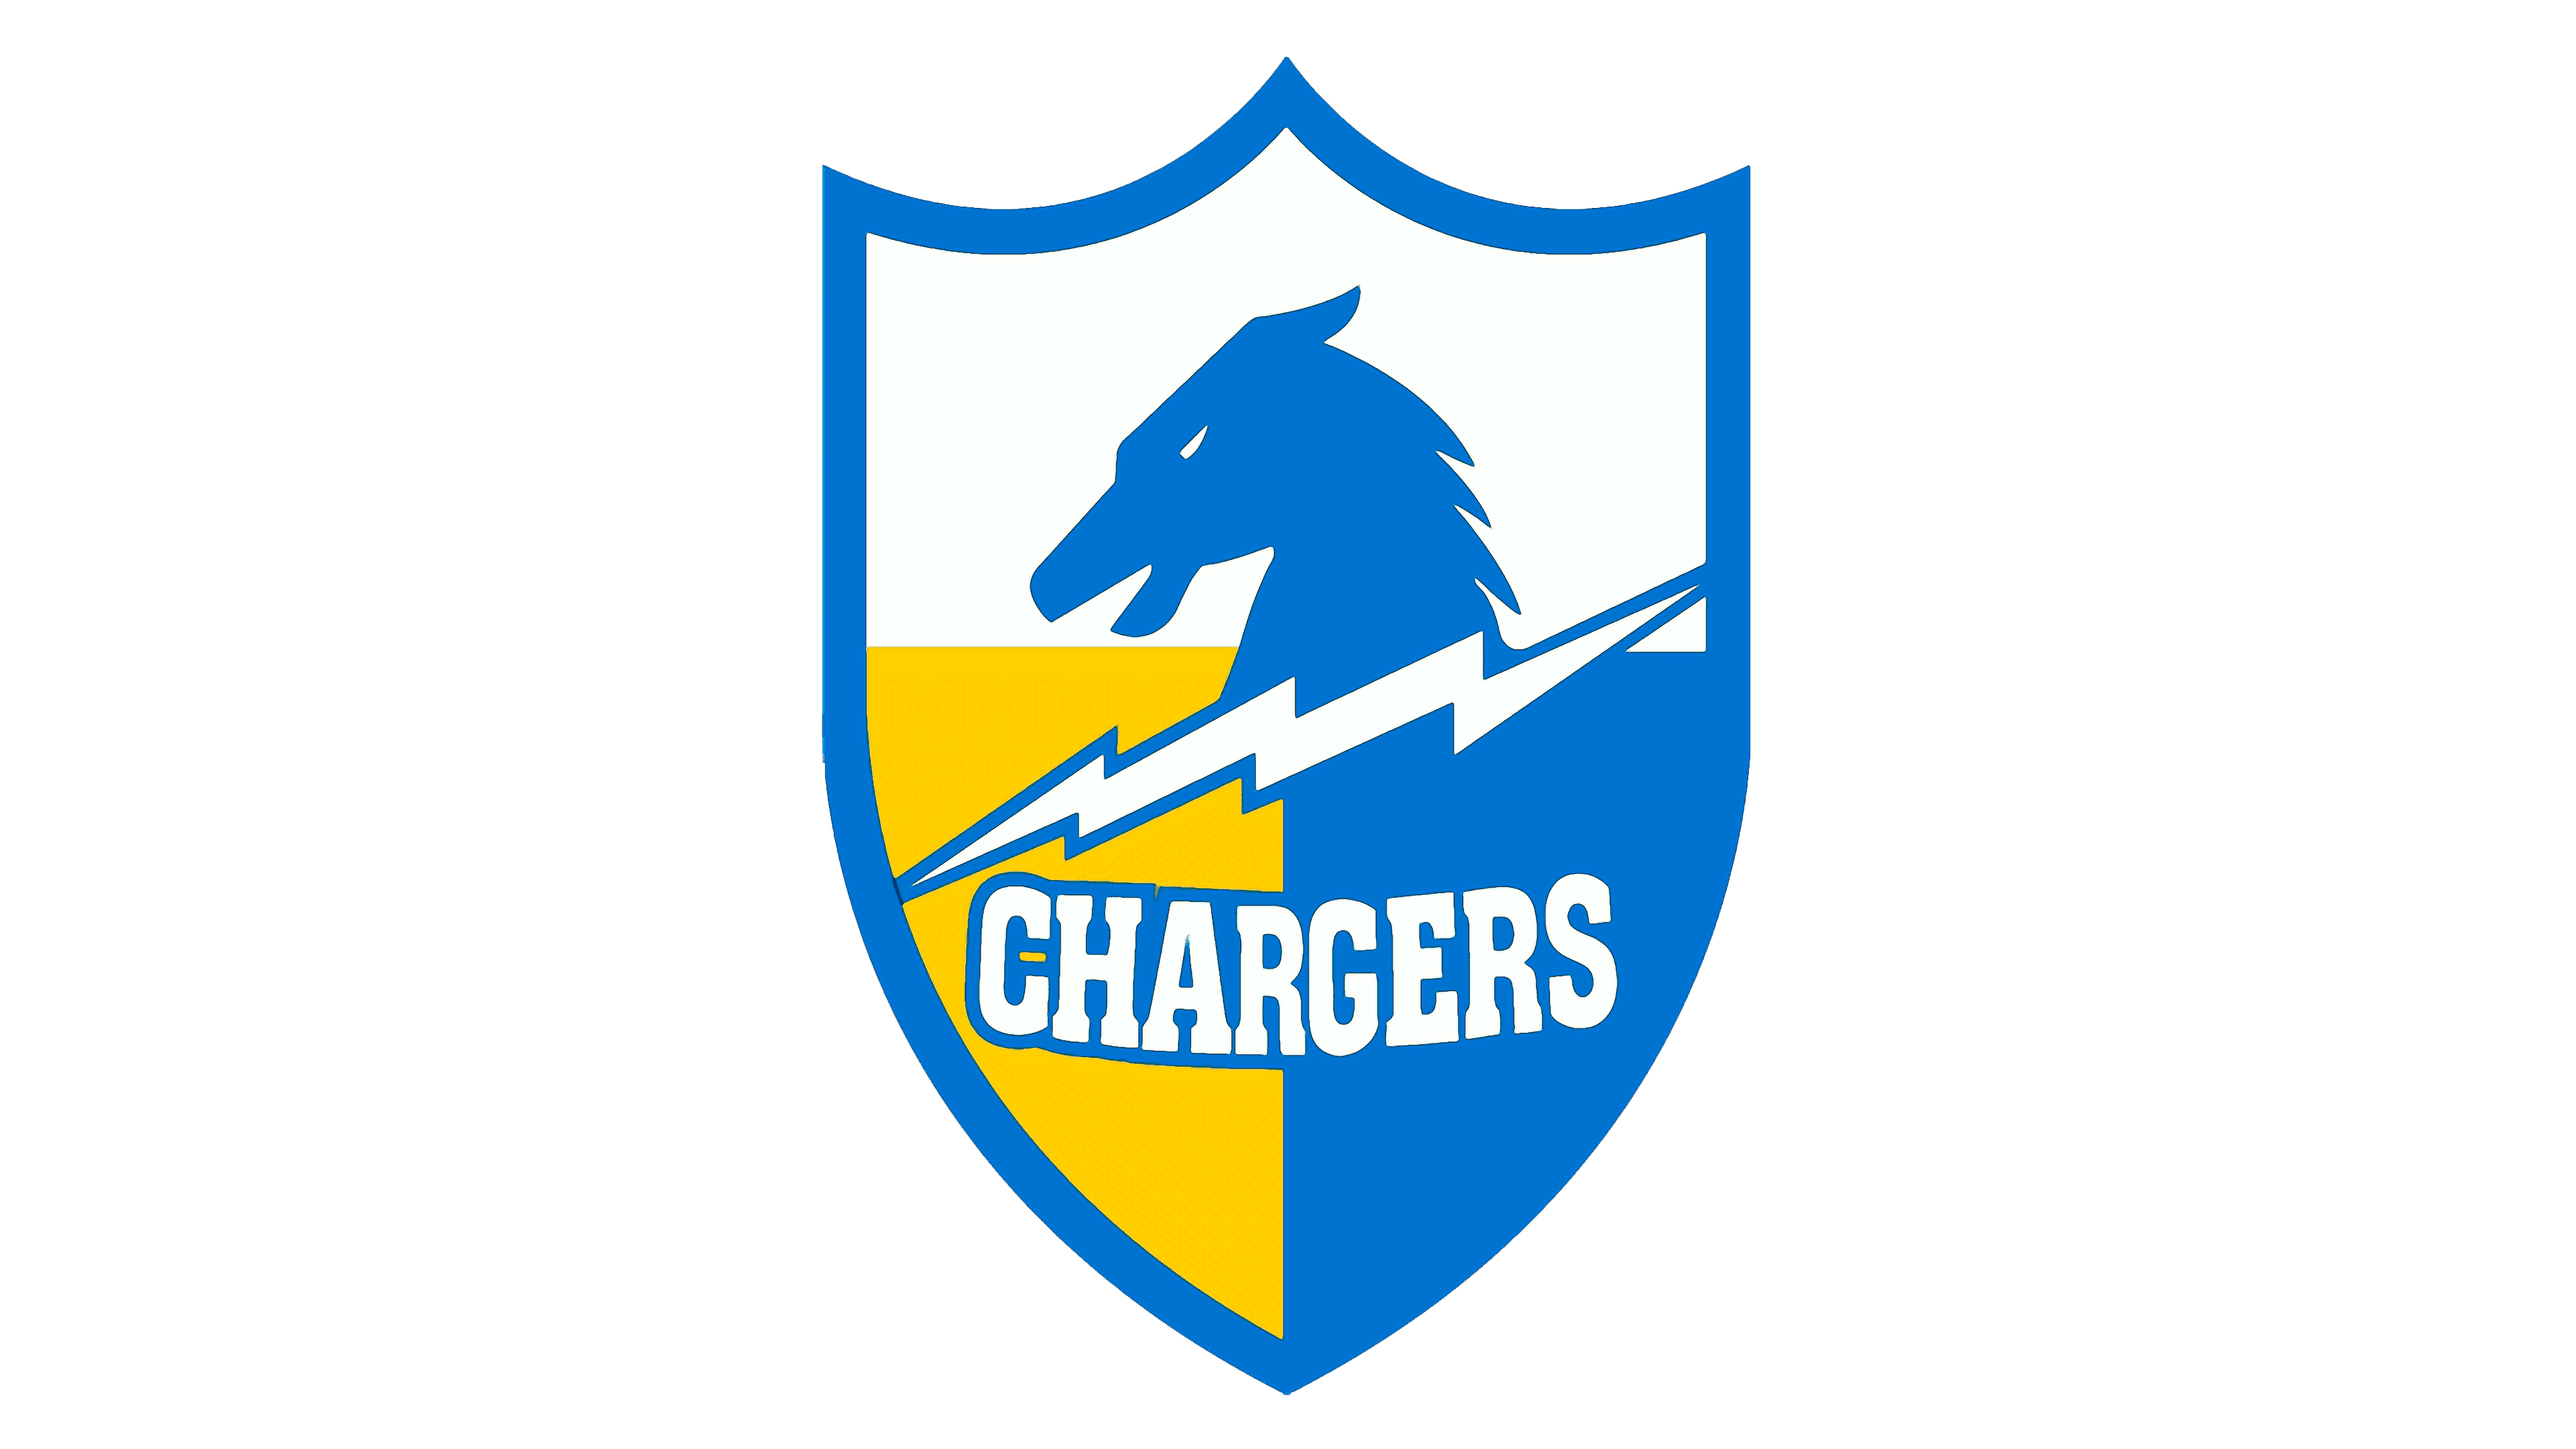 Chargers Logo Png